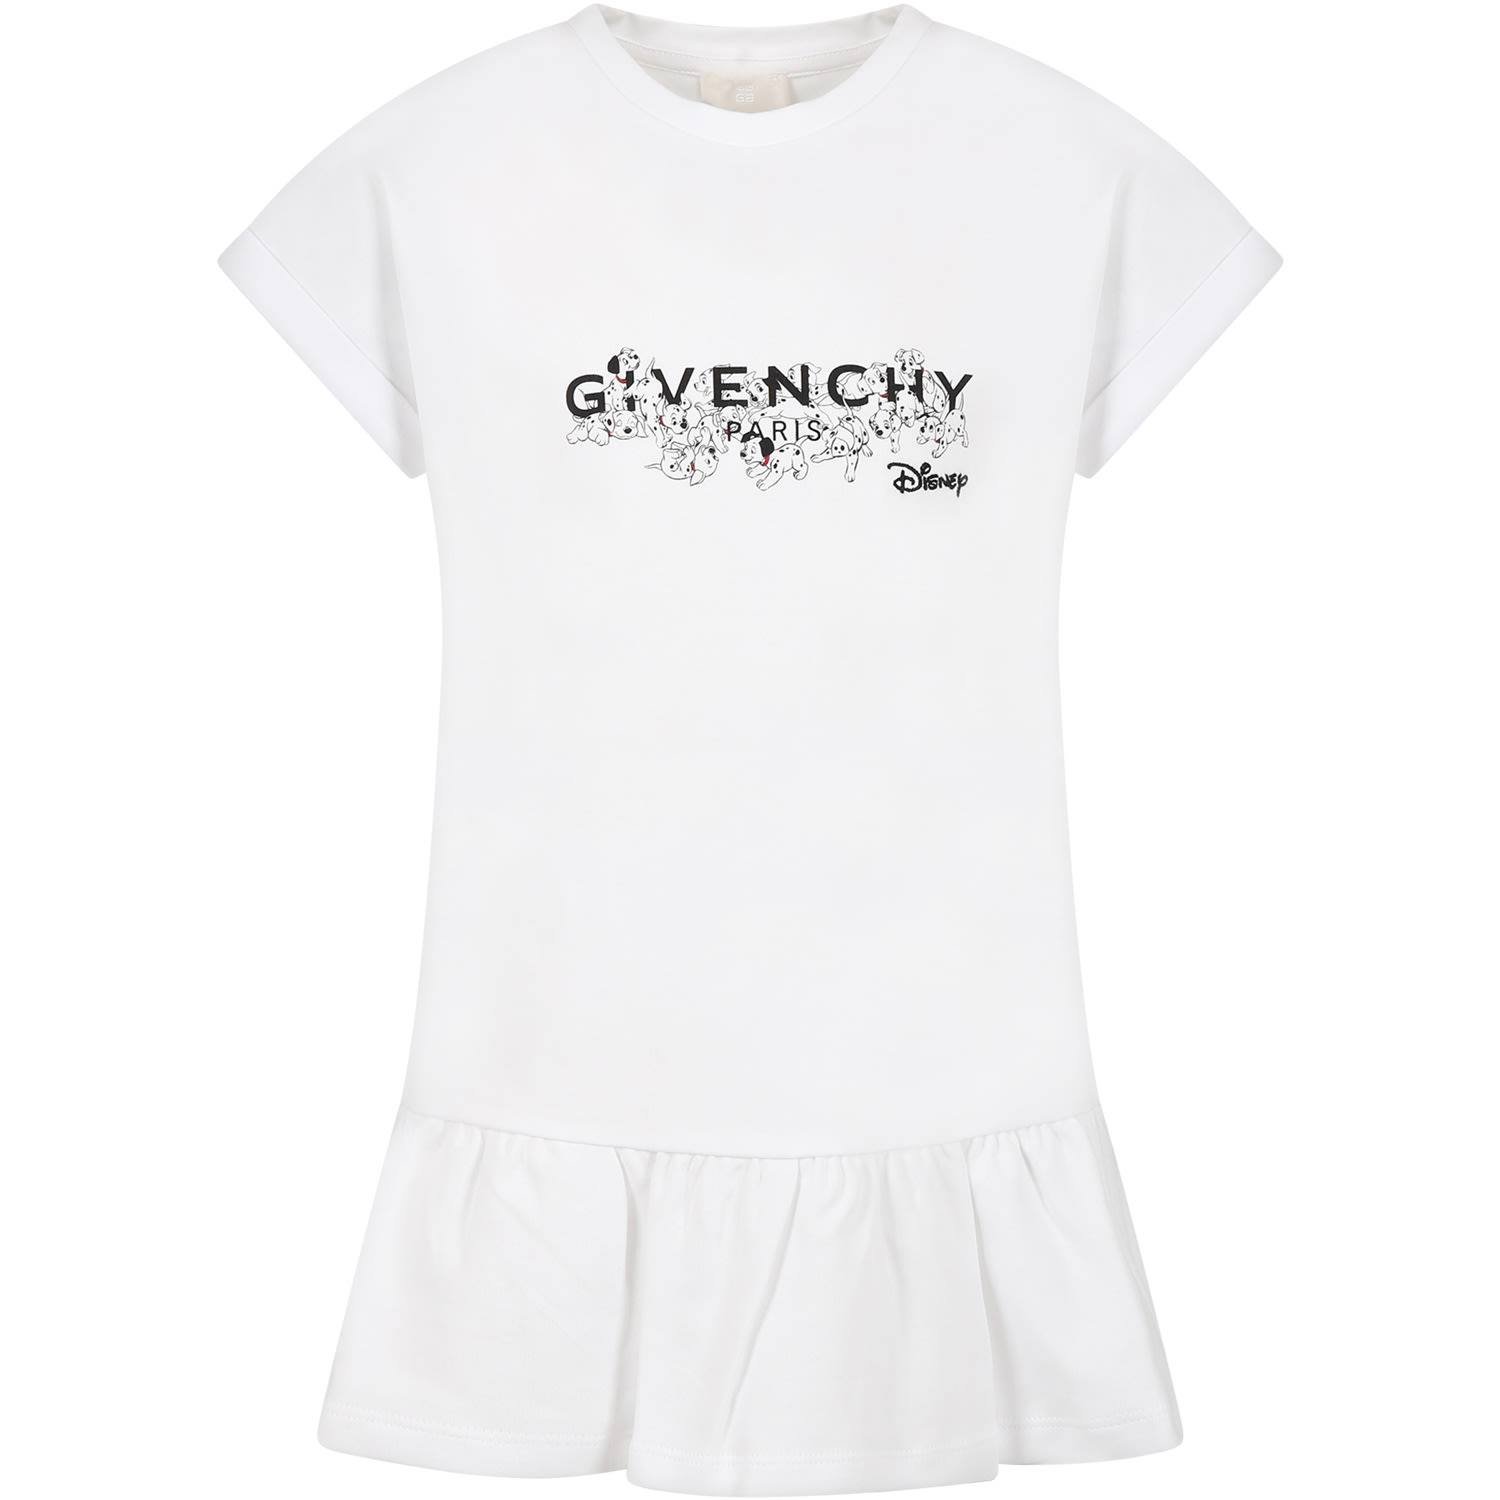 GIVENCHY WHITE DRESS FOR GIRL WITH 101 DALMATIANS AND LOGO